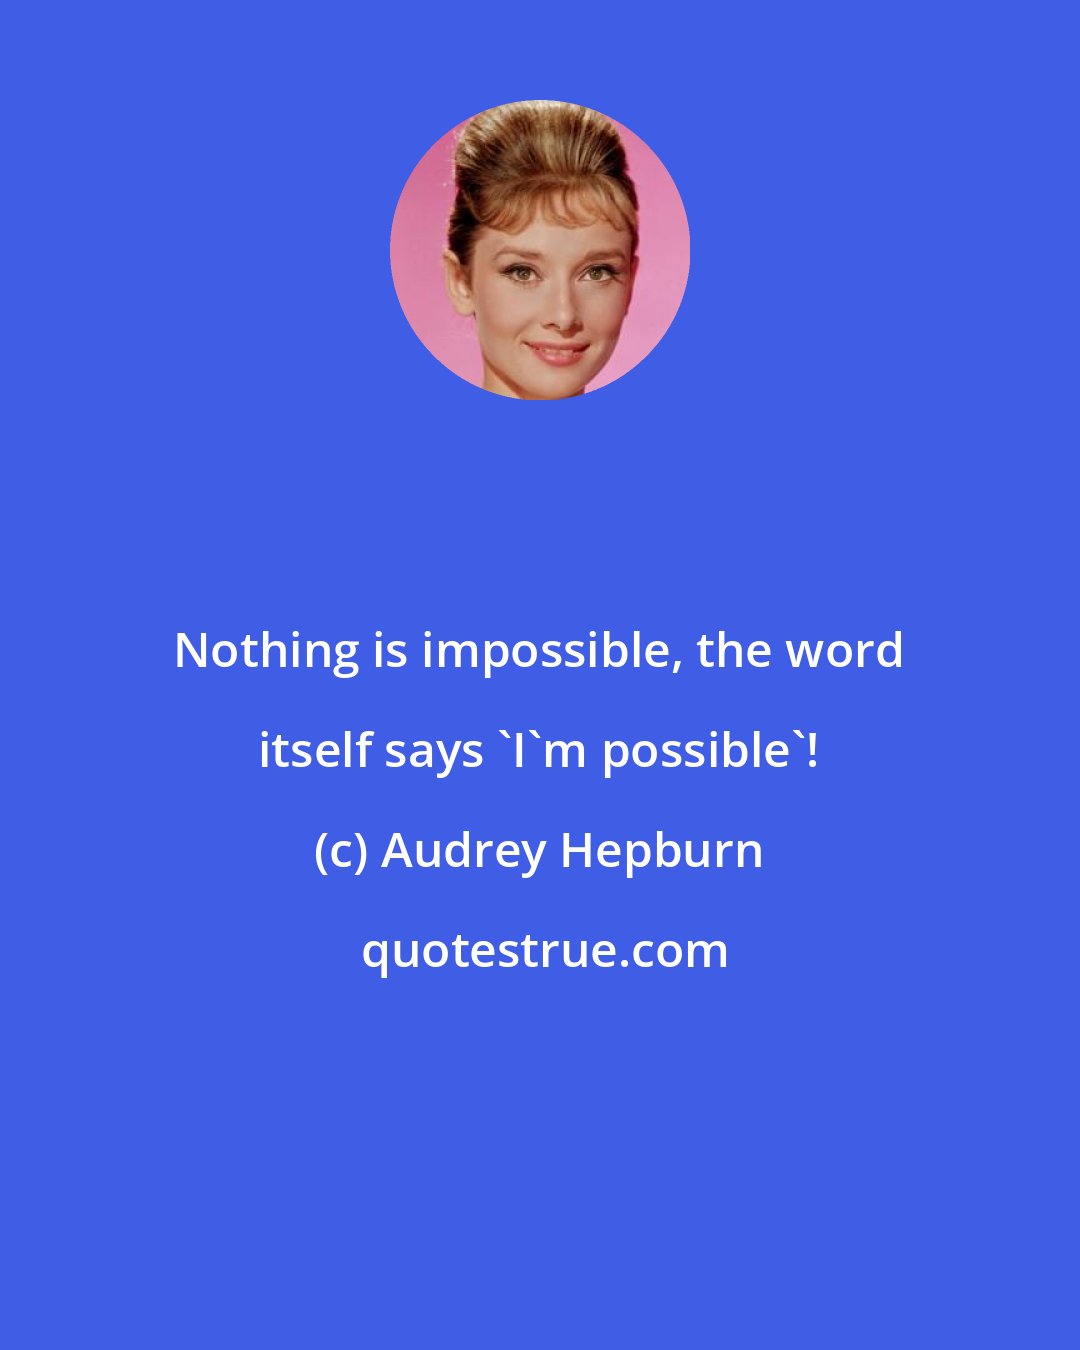 Audrey Hepburn: Nothing is impossible, the word itself says 'I'm possible'!